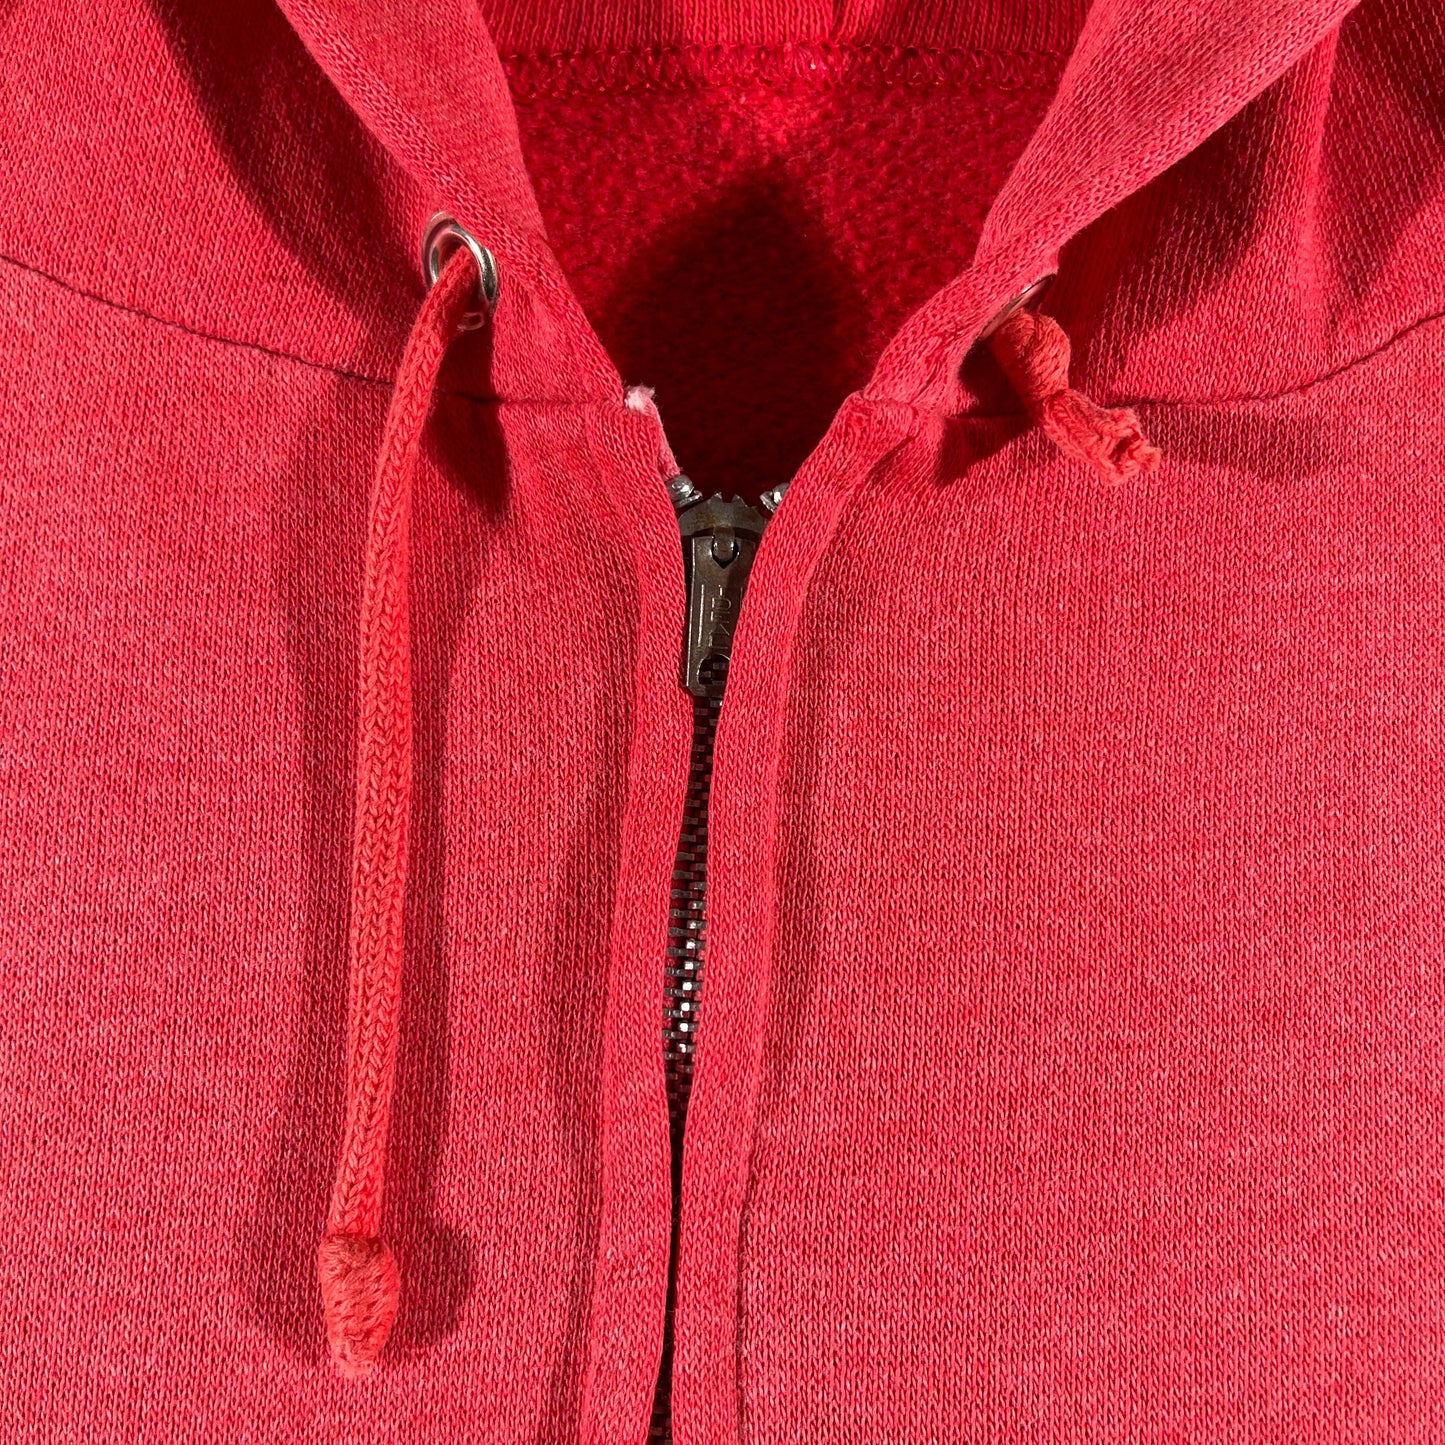 70s Sun Faded Red Cropped Zip Up Hoodie- L